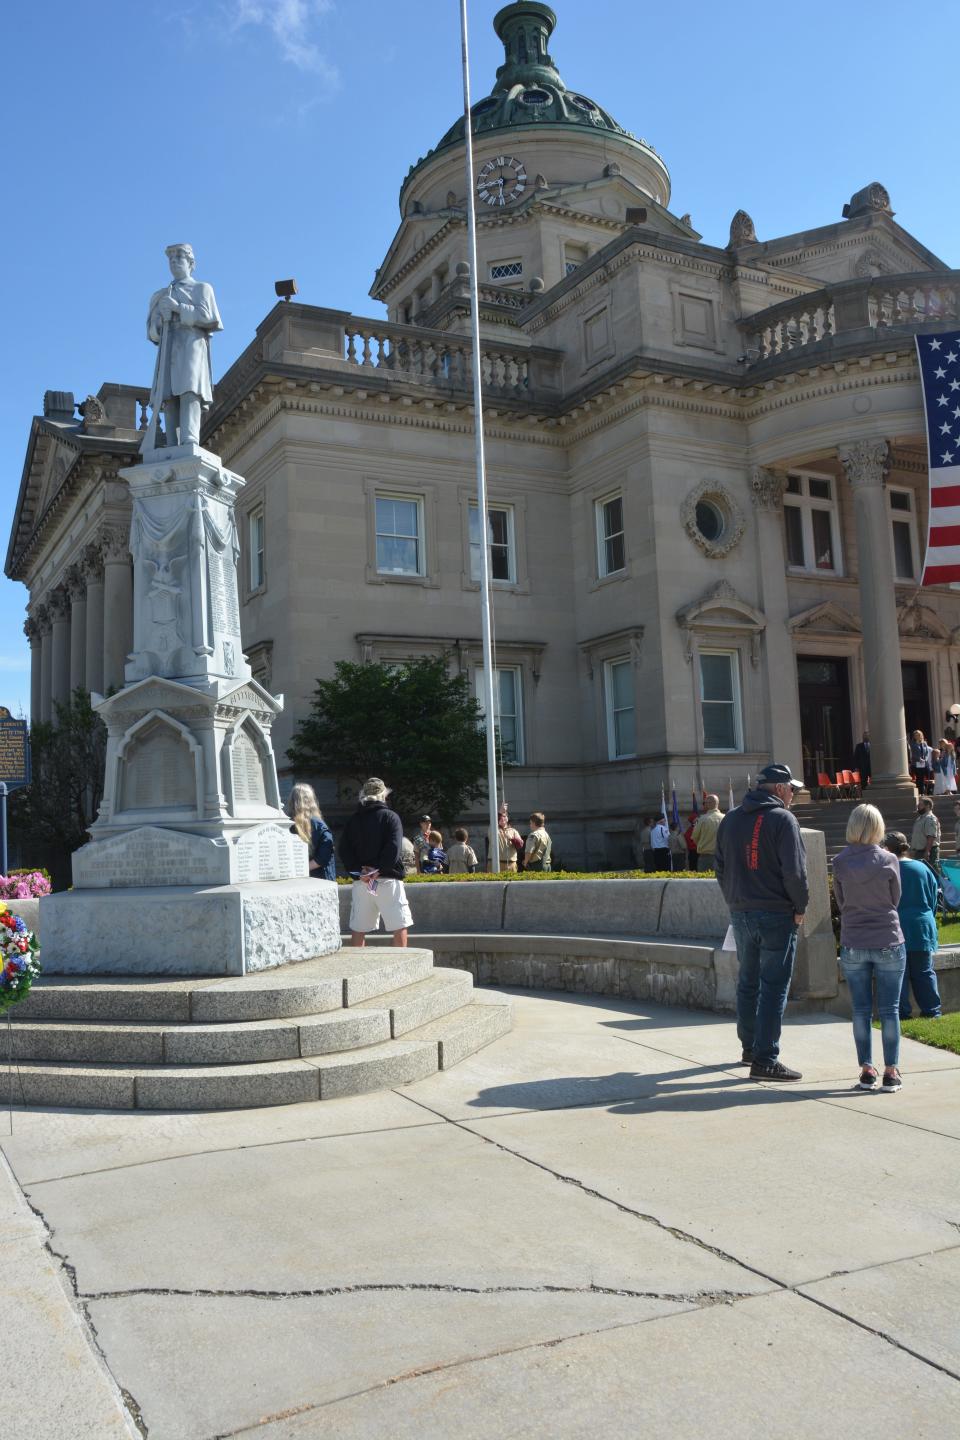 Somerset County courthouse is hub for pleas, trials and sentencings, along with many community events.